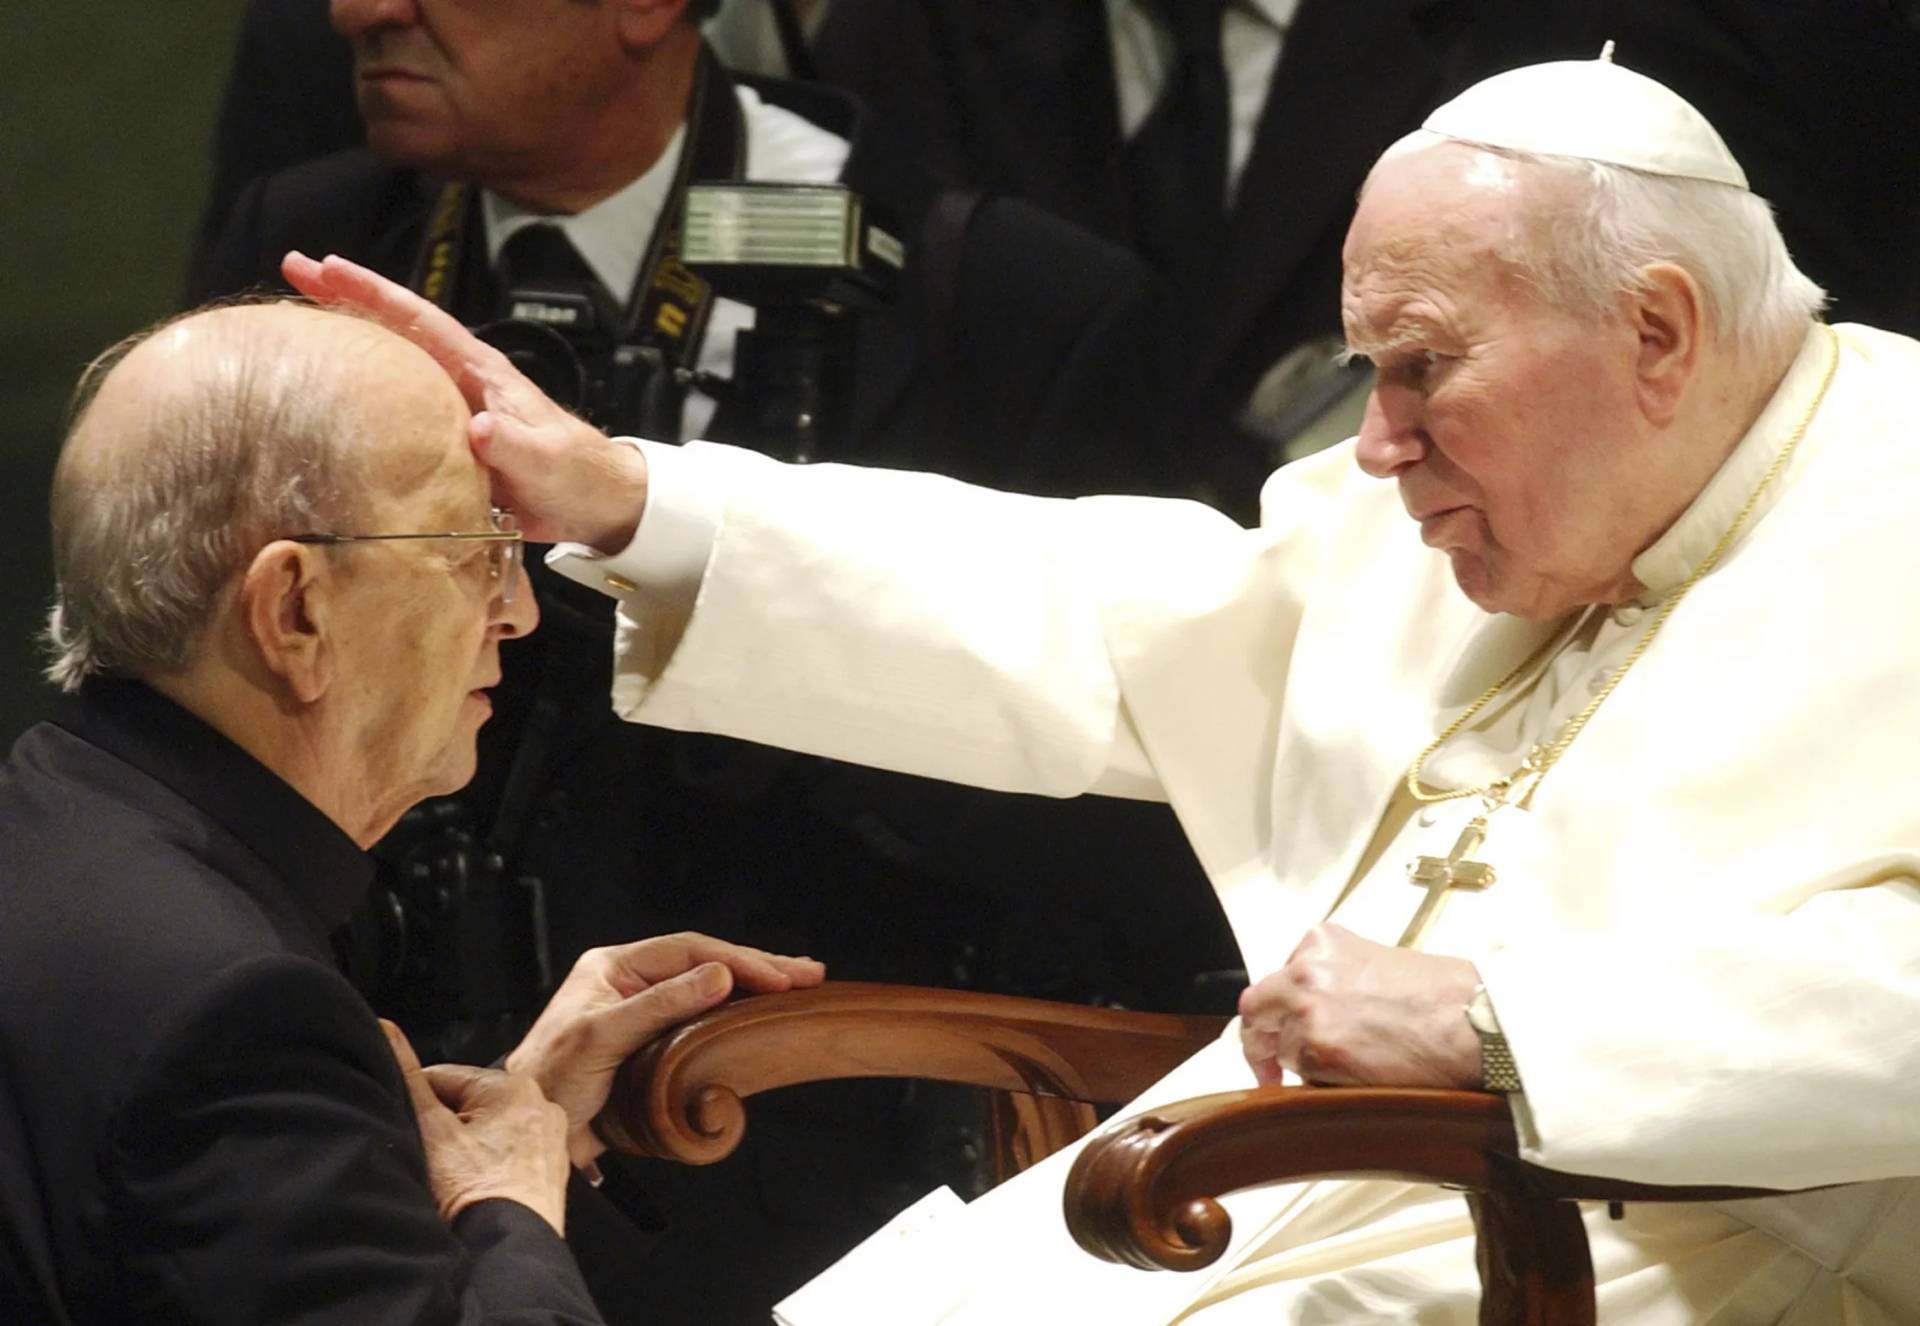 Pope John Paul II gives his blessing to late father Marcial Maciel, founder of Christ’s Legionaries, during a special audience the pontiff granted to about four thousand participants of the Regnum Christi movement, at the Vatican, on Nov. 30, 2004. The recently-opened archives of Pope Pius XII have shed new light on claims the World War II-era pope didn’t speak out about the Holocaust. But they’re also providing details about another contentious chapter in Vatican history: the scandal over the founder of the Legionaries of Christ. (Credit: Plinio Lepri/AP.)